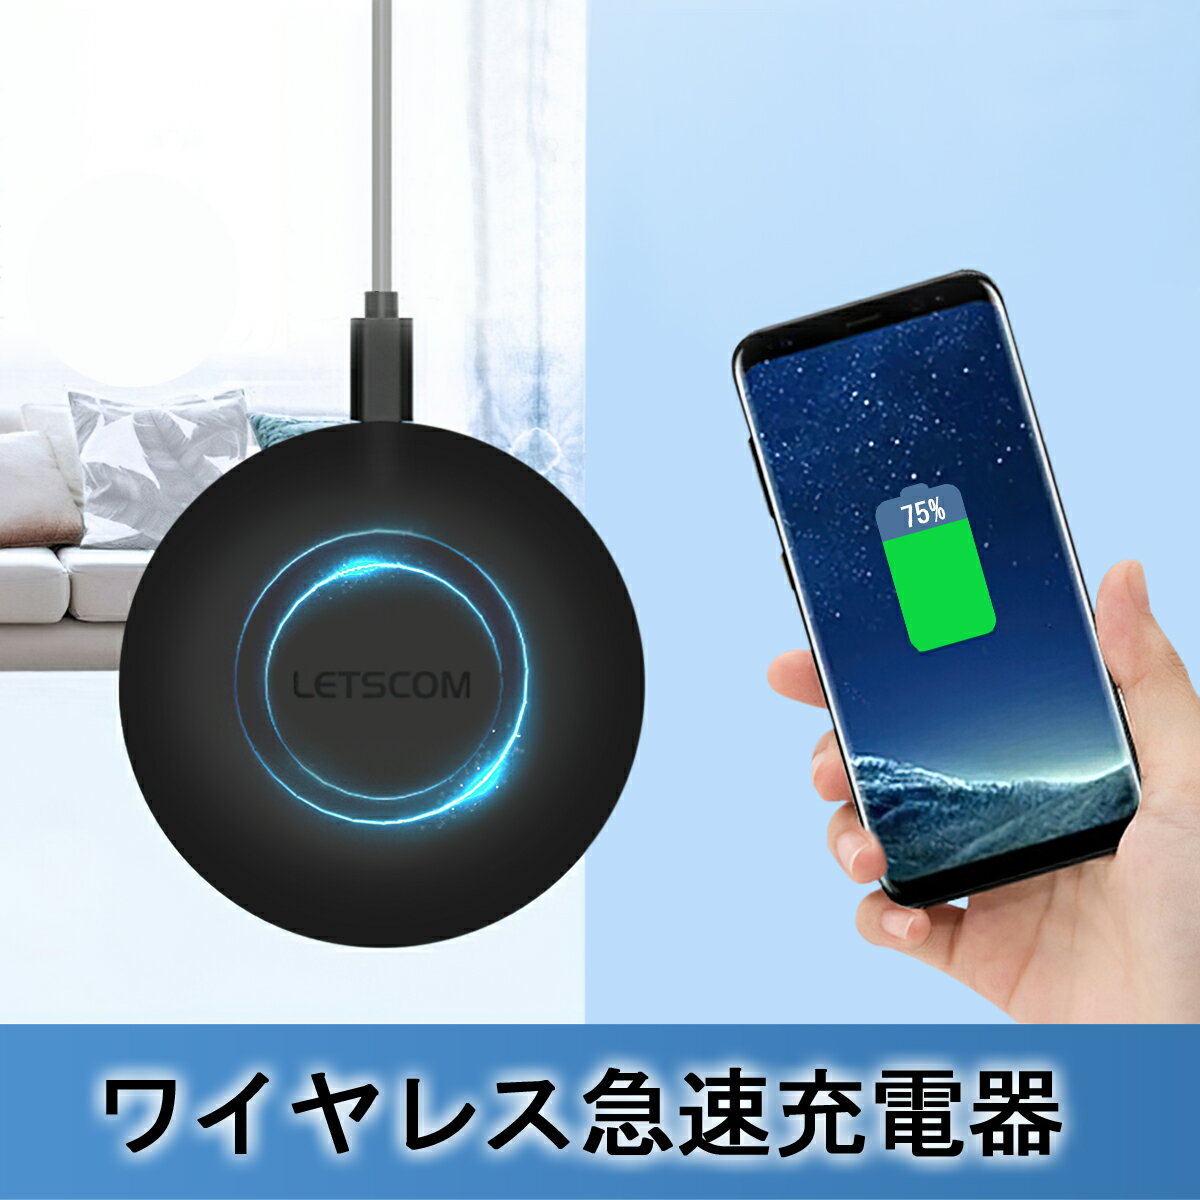 LETSCOM 15W ワイヤレス充電器 ワイヤレス急速充電器 Qi認証 超薄型 急速ワイヤレスチャージャ iPhone 12/11/11 Pro/11 Pro Max/XS/XS Max/XR/X/8/8 Plus/AirPods 2/AirPods Pro/Samsung Galaxy S20/S10/S10e/S10 /Note10 などのQi他機種対応